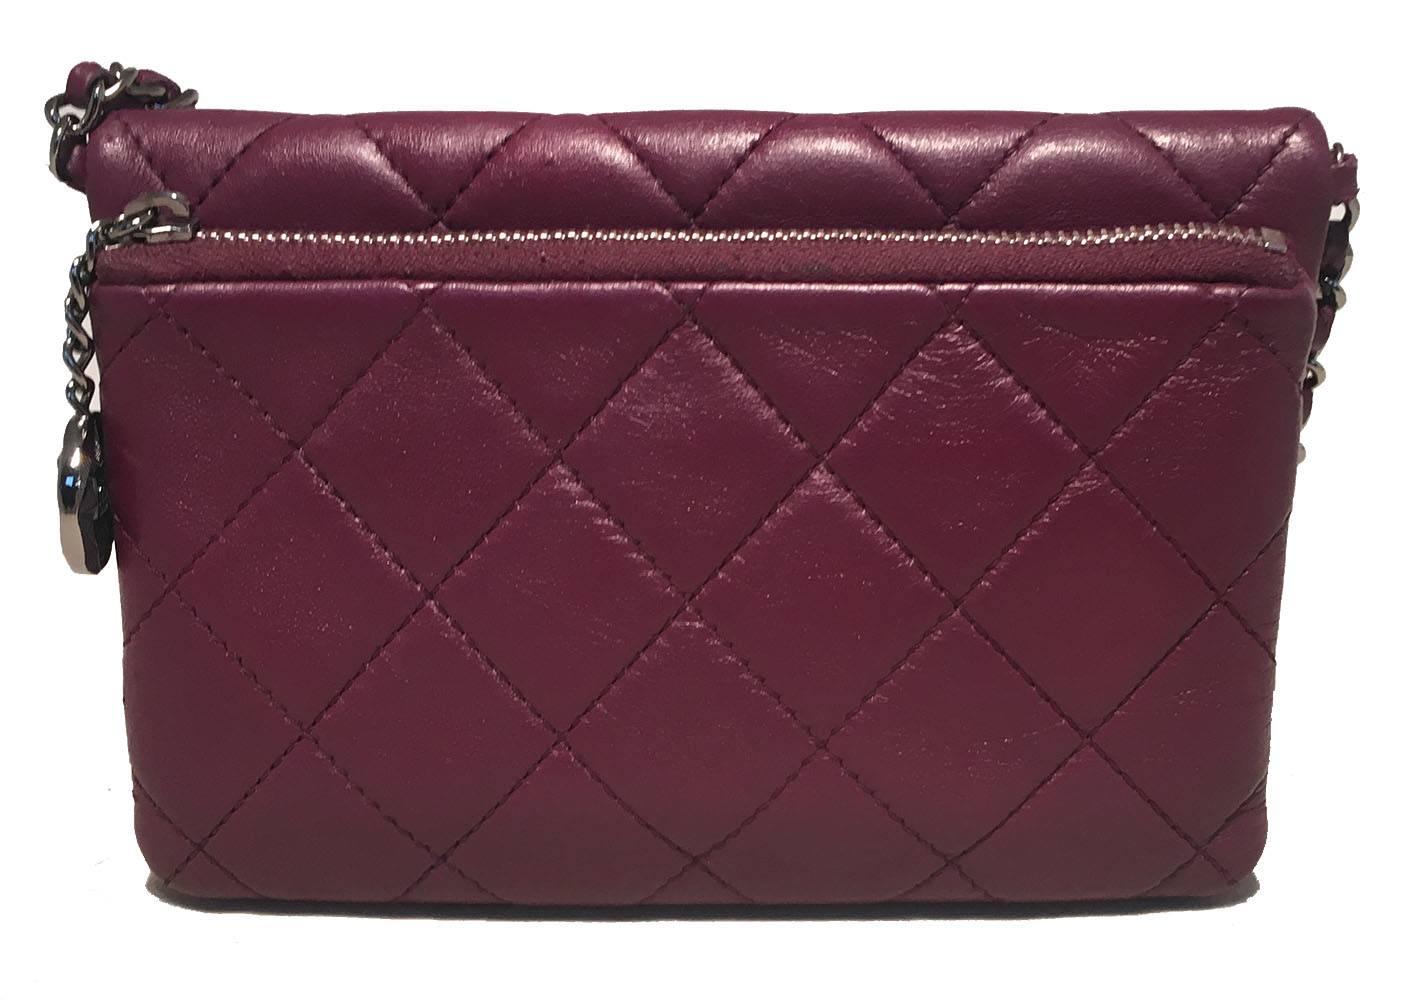 FABULOUS Chanel Purple leather wallet on a chain WOC classic in excellent condition.  Purple quilted lambskin leather exterior trimmed with shinning silver hardware.  Woven chain and leather shoulder strap can be worn as a shoulder bag or crossbody